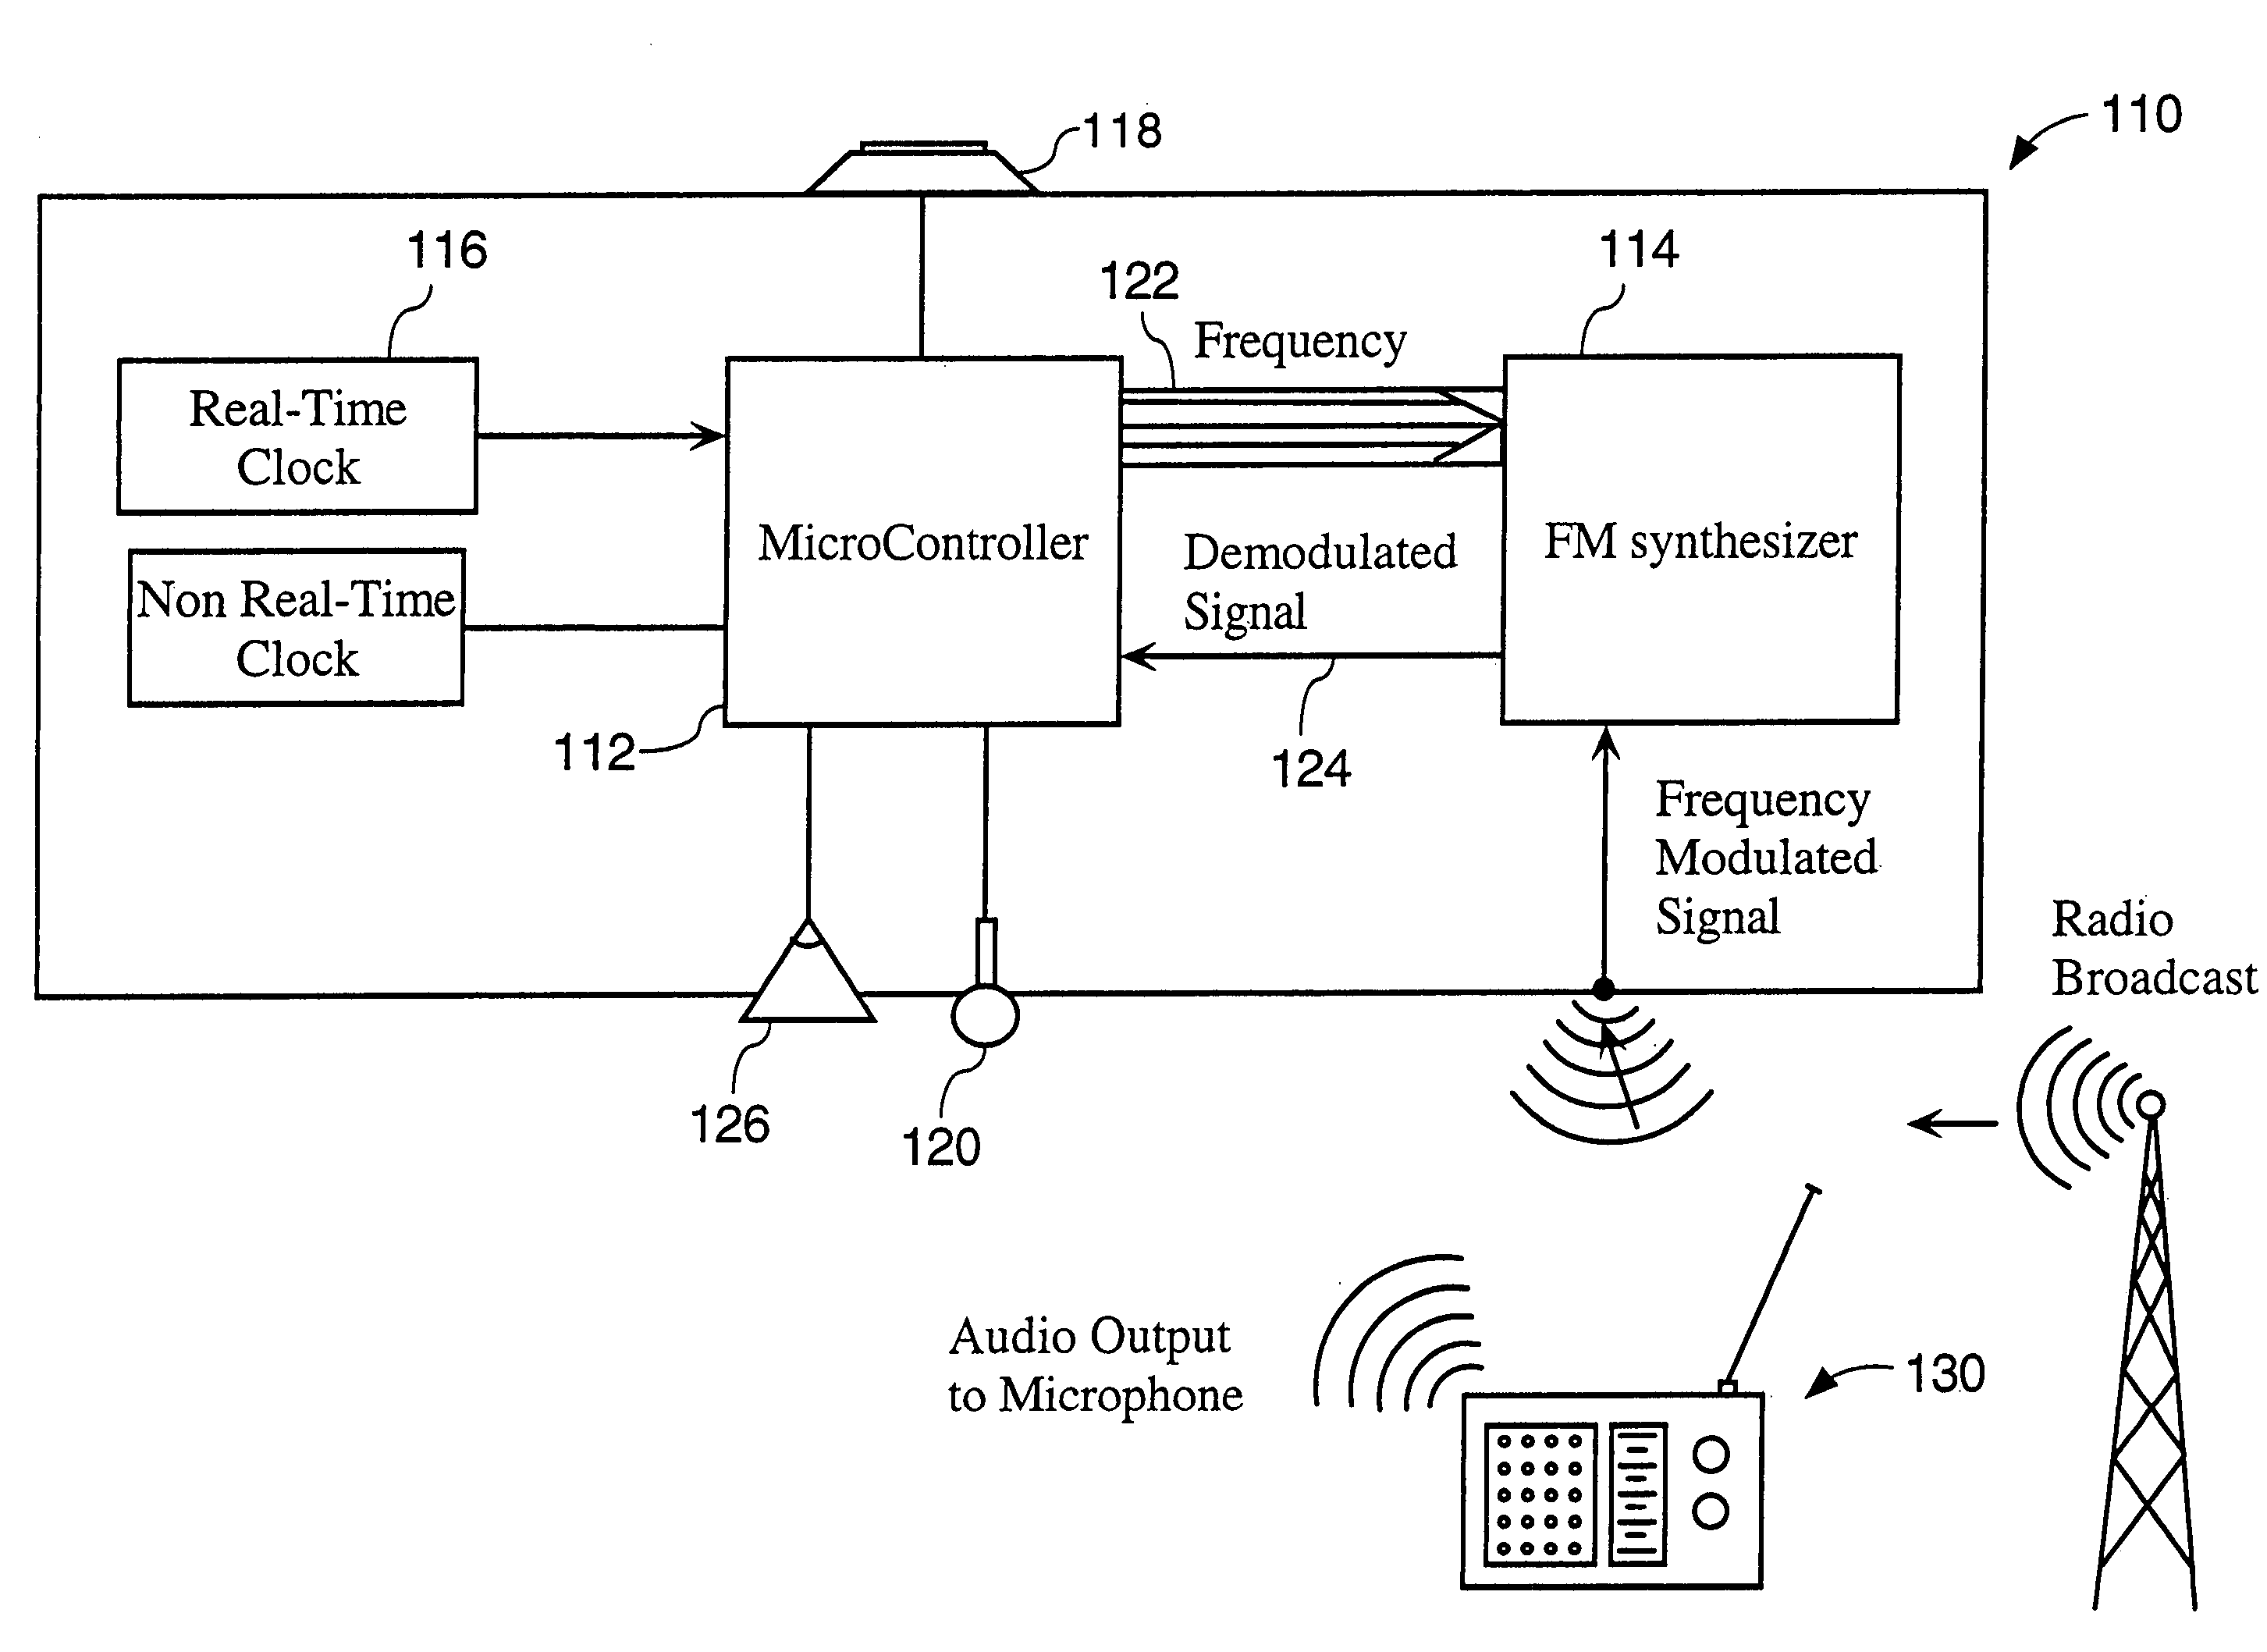 Method and apparatus for detecting a radio frequency to which a broadcast receiver is tuned